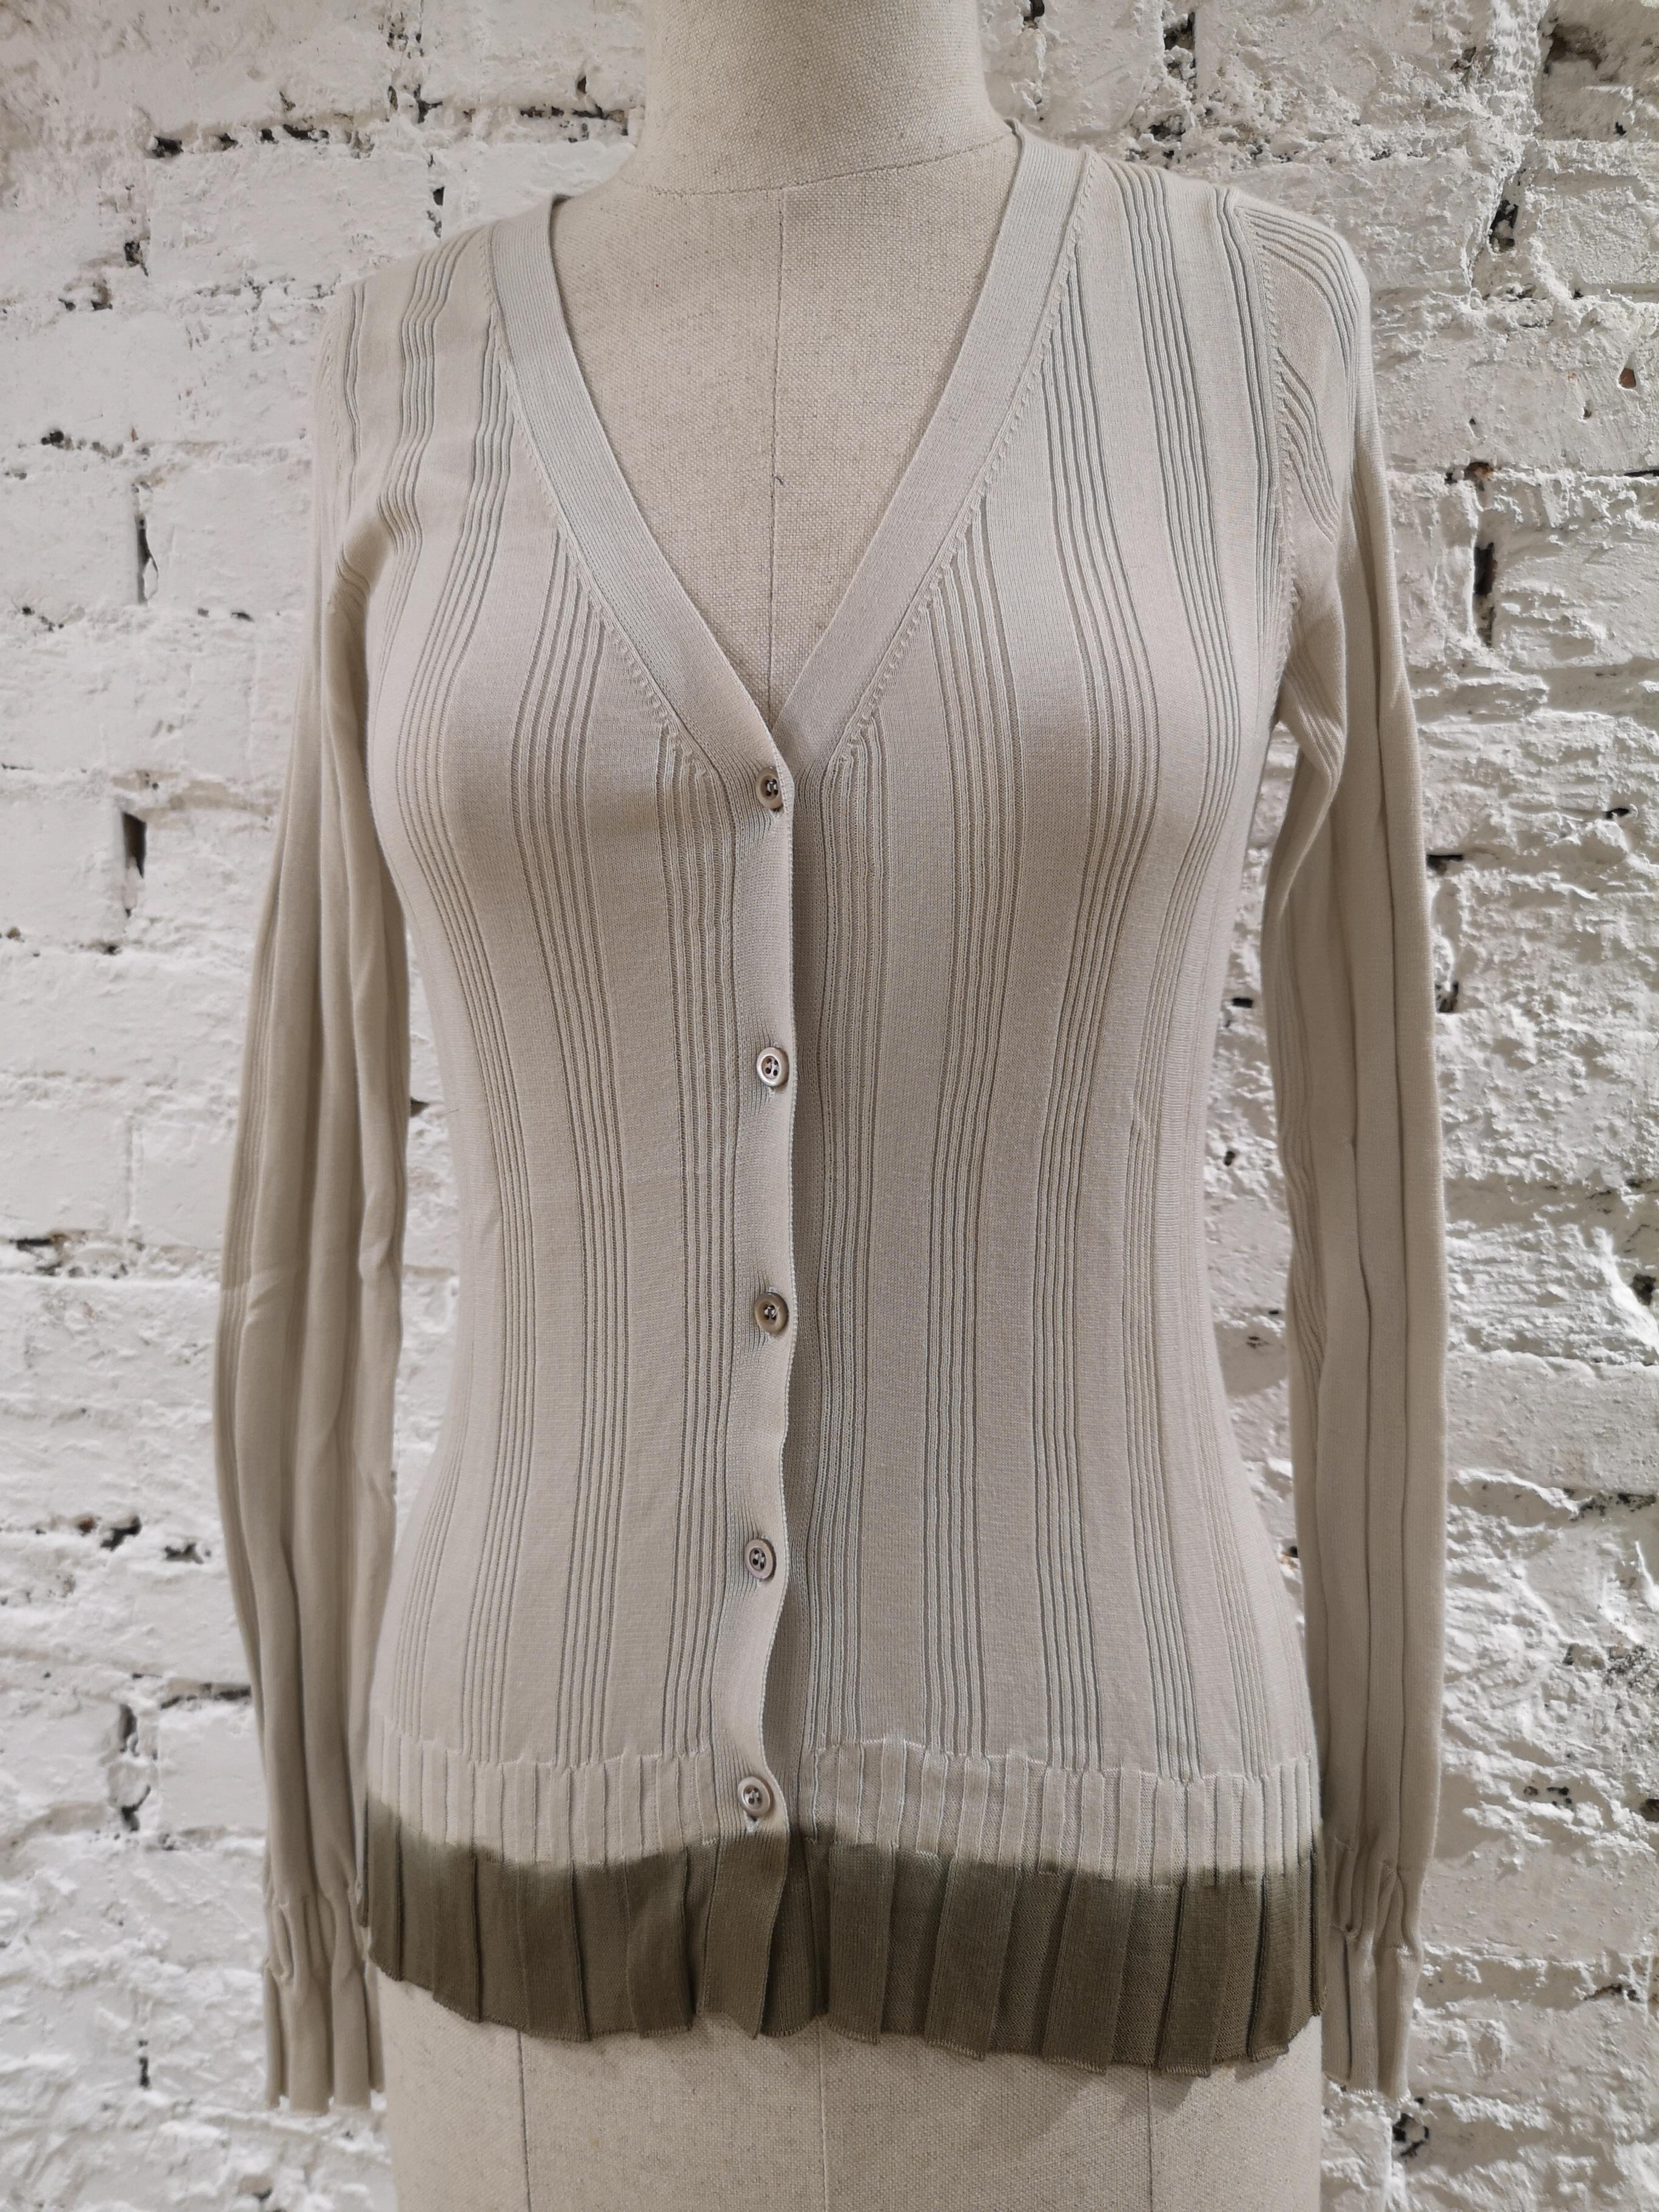 Prada beige cotton sweater cardigan
totally made in italy in size 40